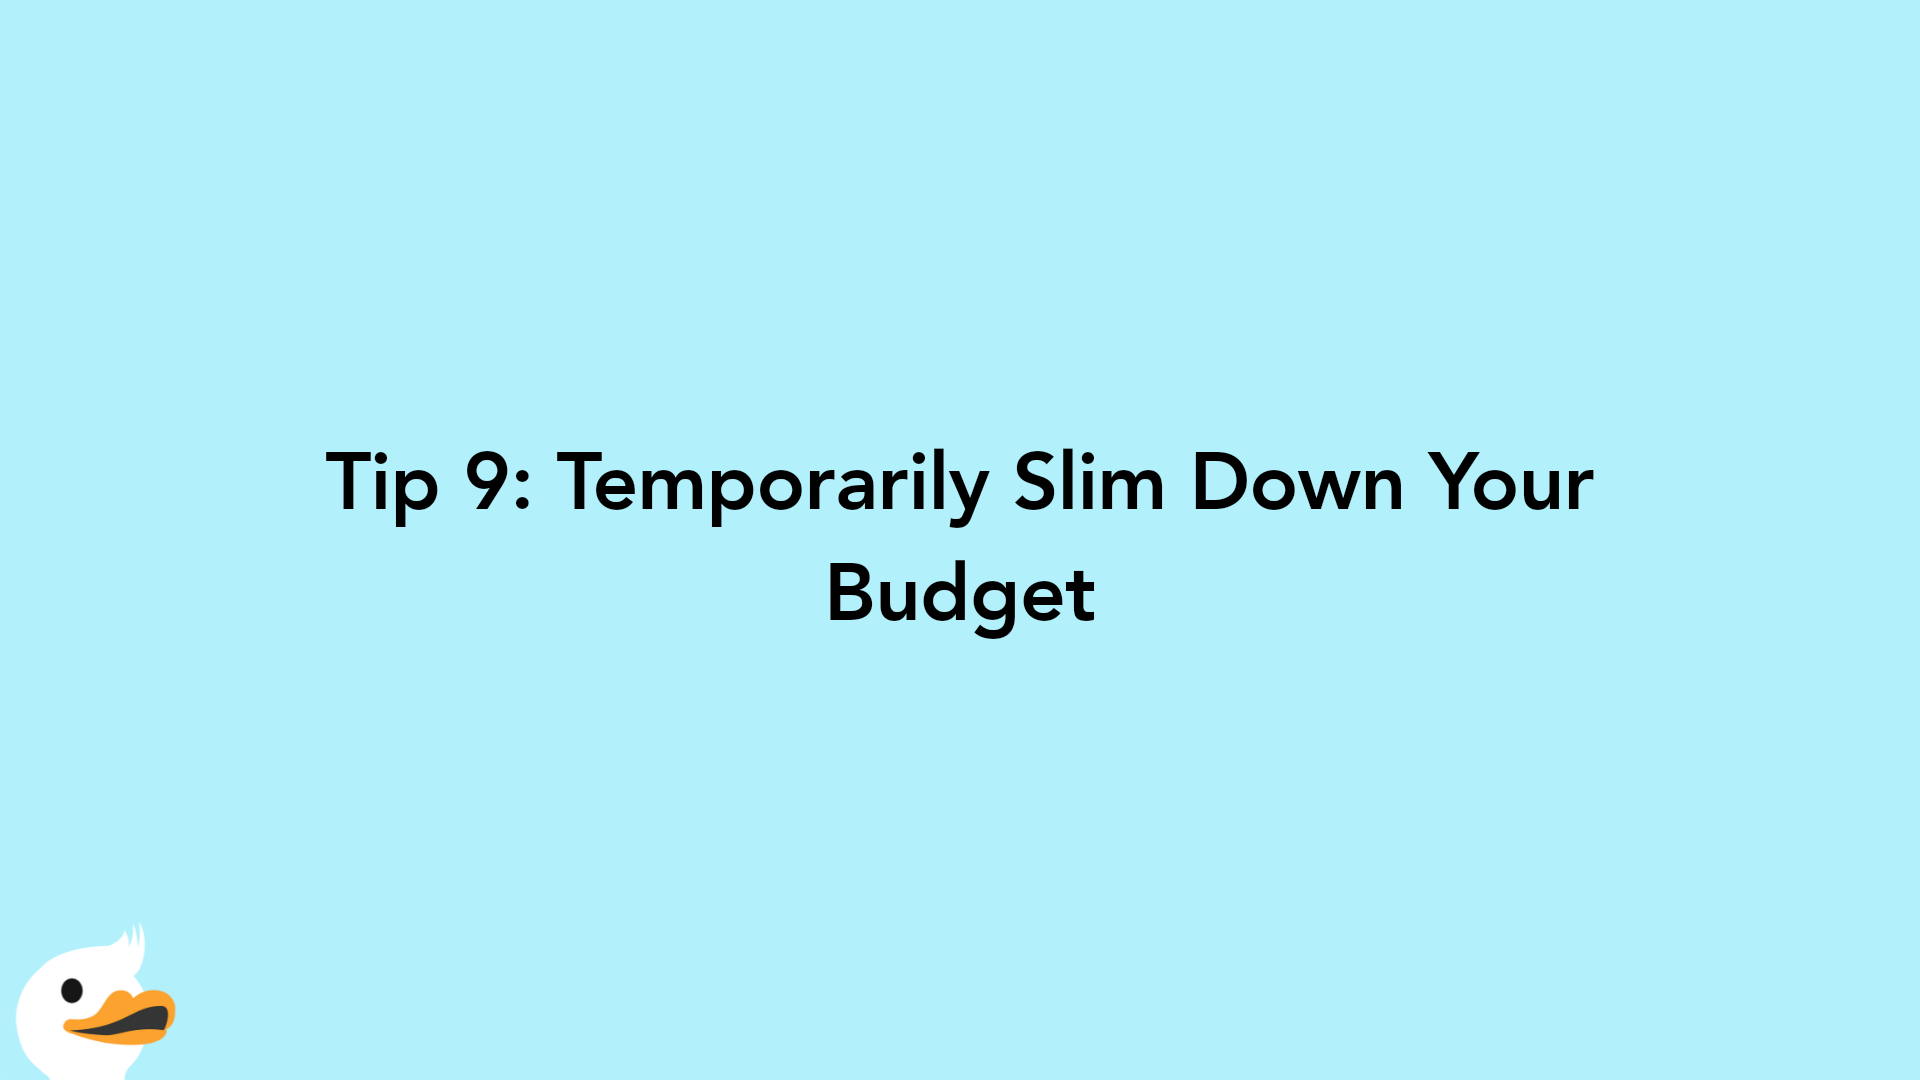 Tip 9: Temporarily Slim Down Your Budget